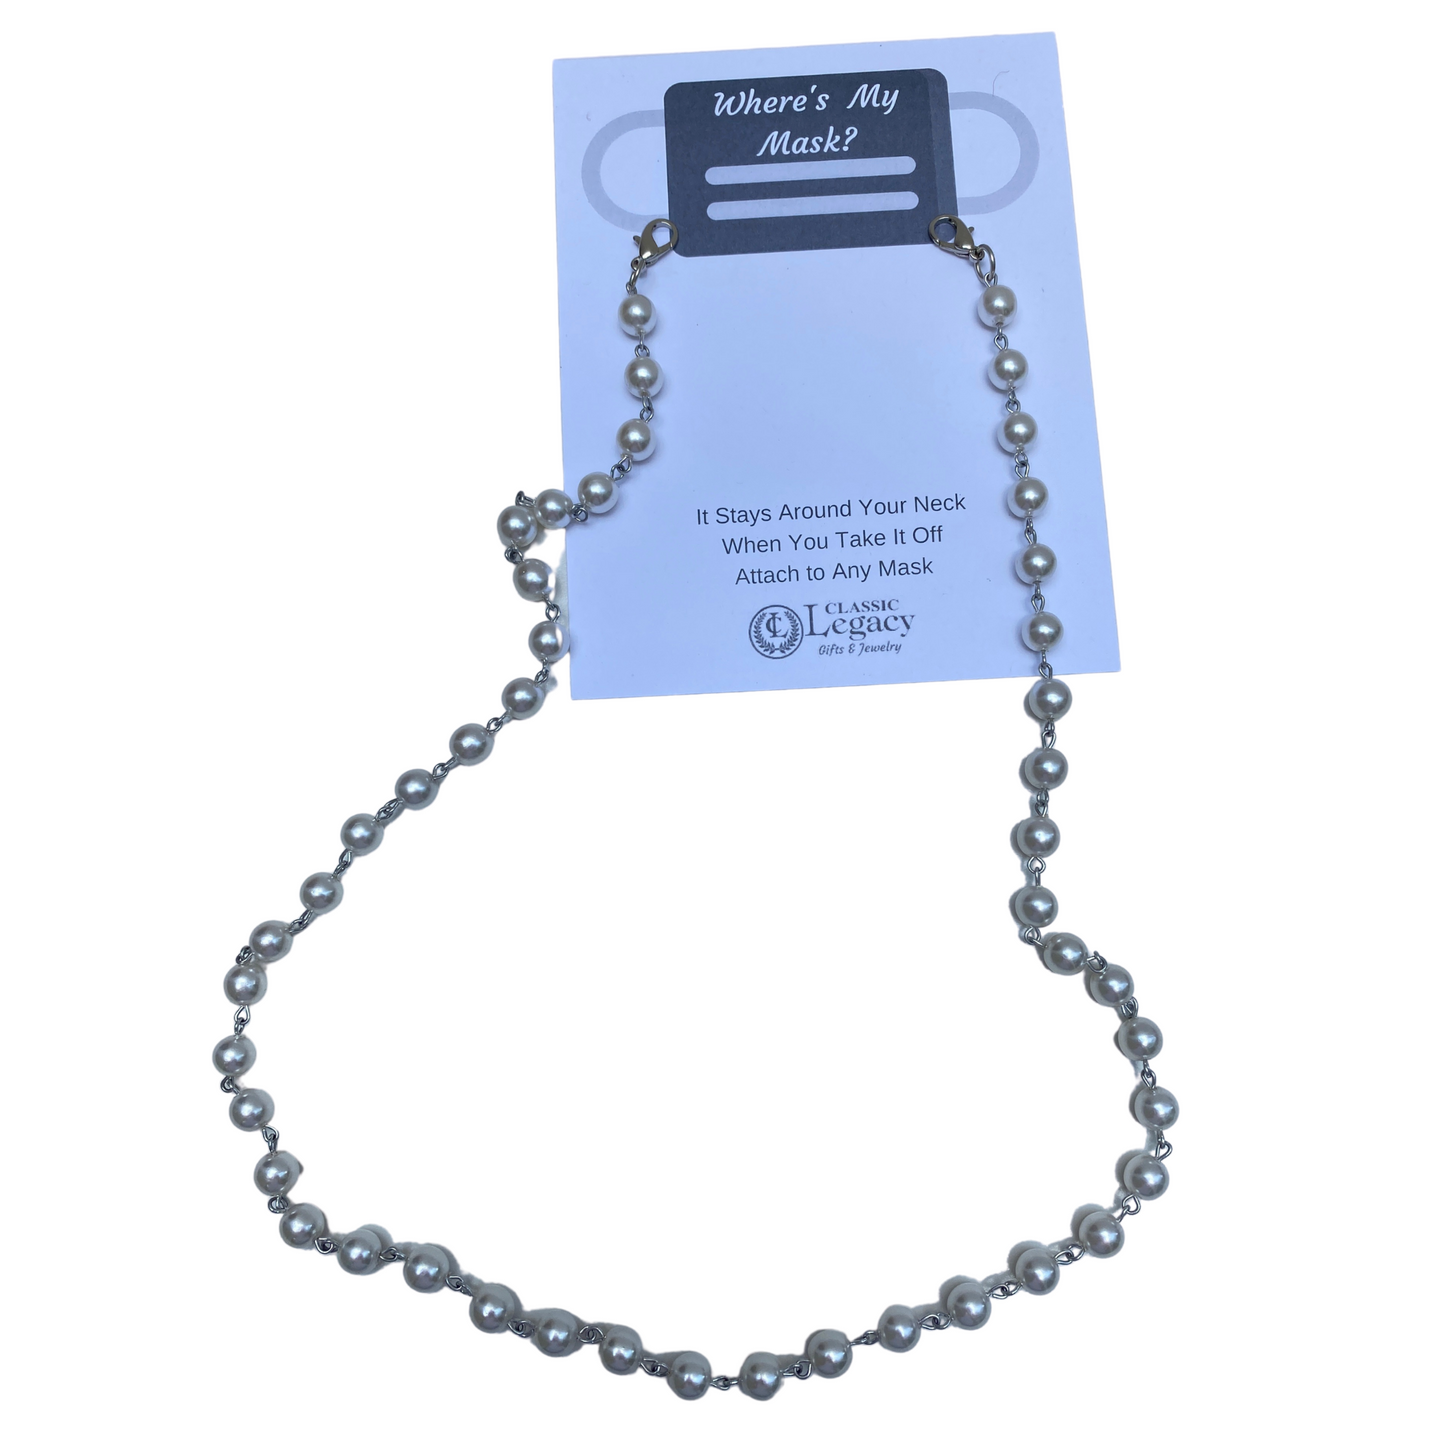 Faux Pearl Necklace Chain, Pearl Mask Chain